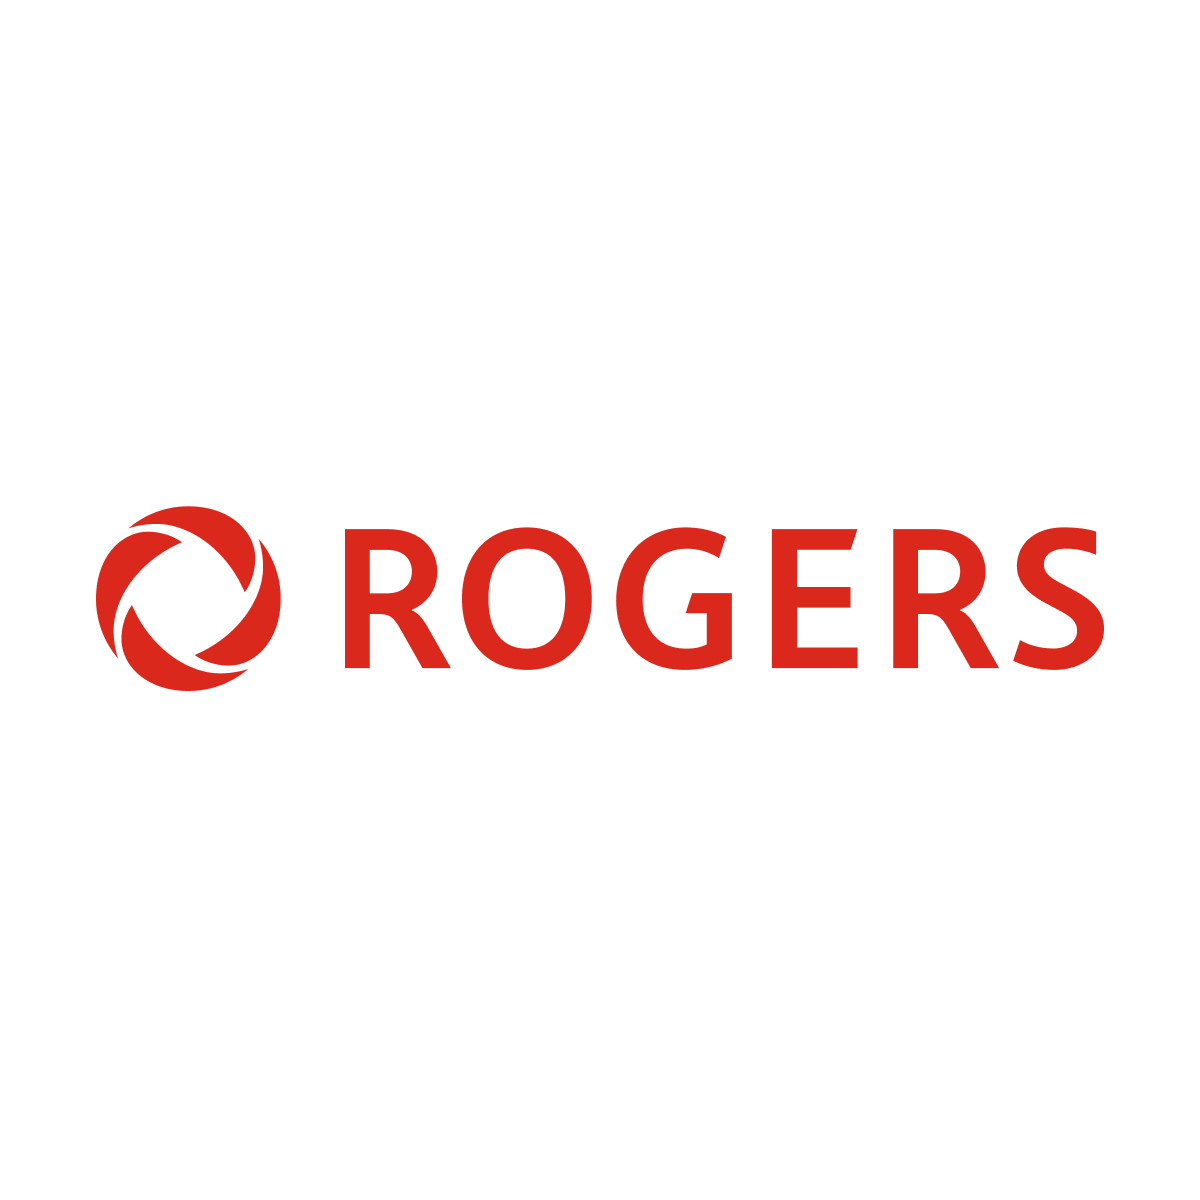 [Shaw internet customers] 100GB @ 1Gbps (5G/5G+) on Rogers for $40/month (BYOD) YMMV